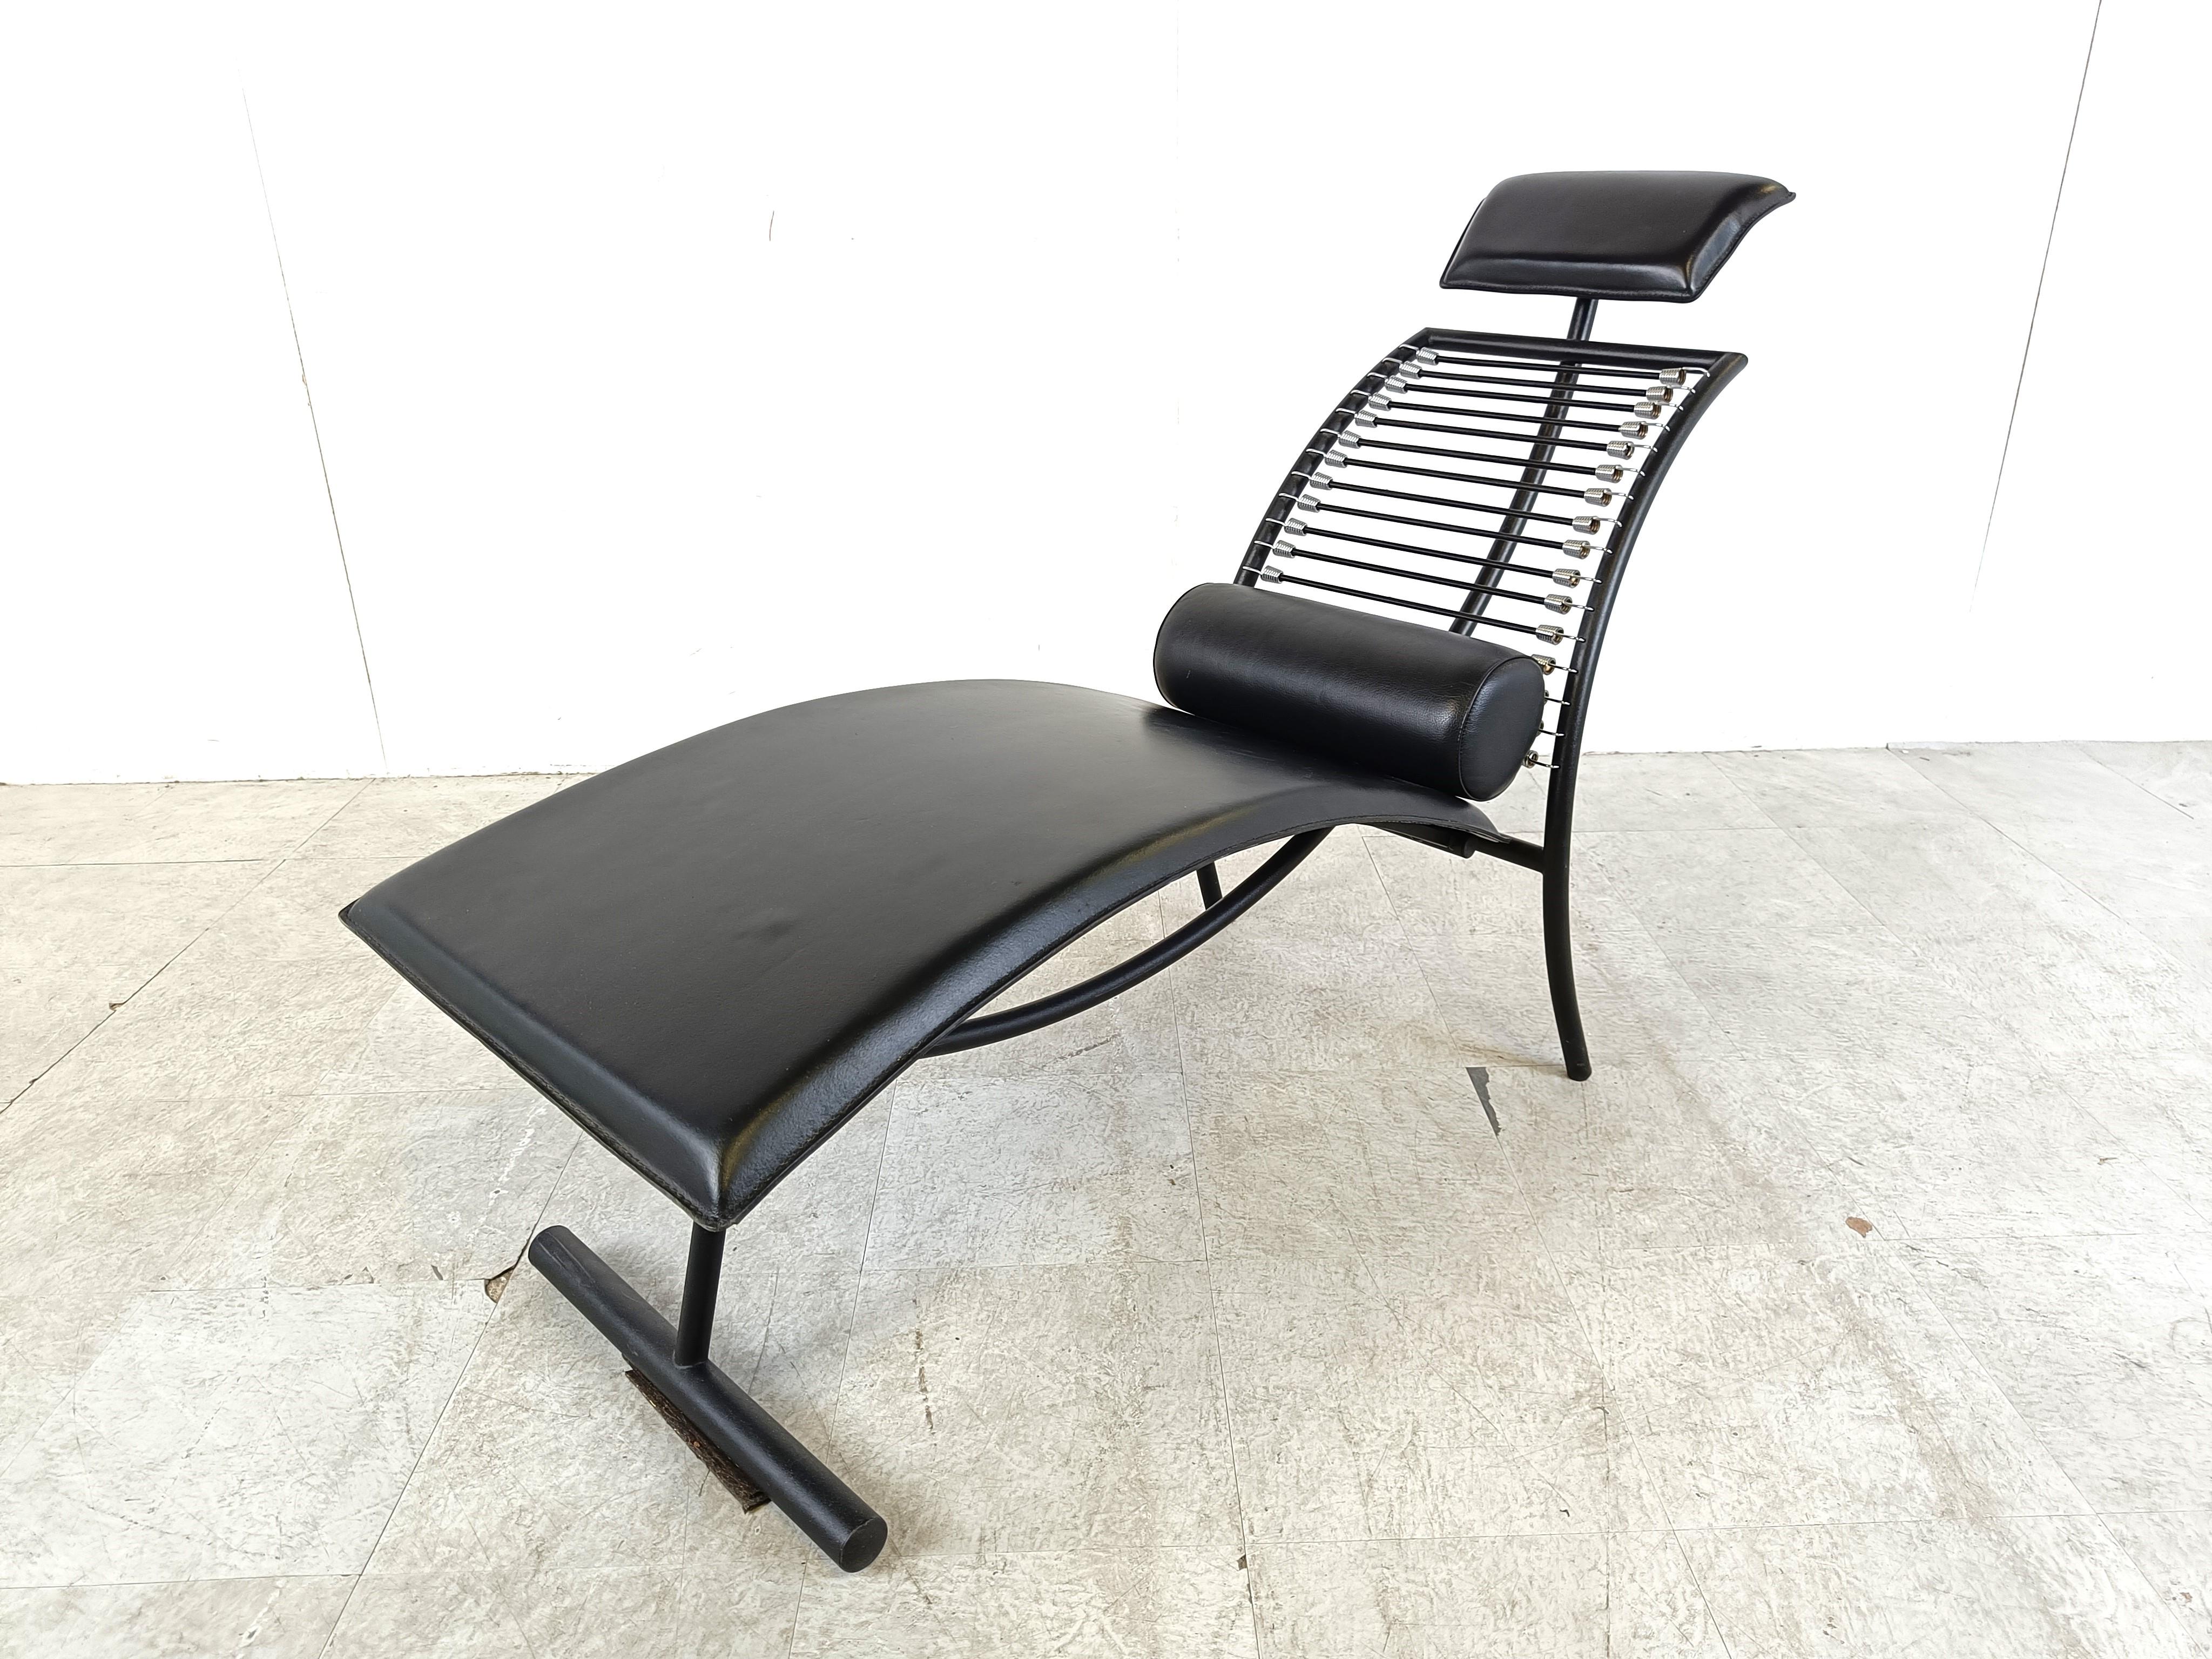 Vintage 'chaise longue' made from a elegant chrome frame, elastic cords and black leather cushions.

Rare and beautiful lounge chair very much in the manne of Rene Herbst 'sandow' chair.

The chair has beautiful curves and has a timeless appeal.